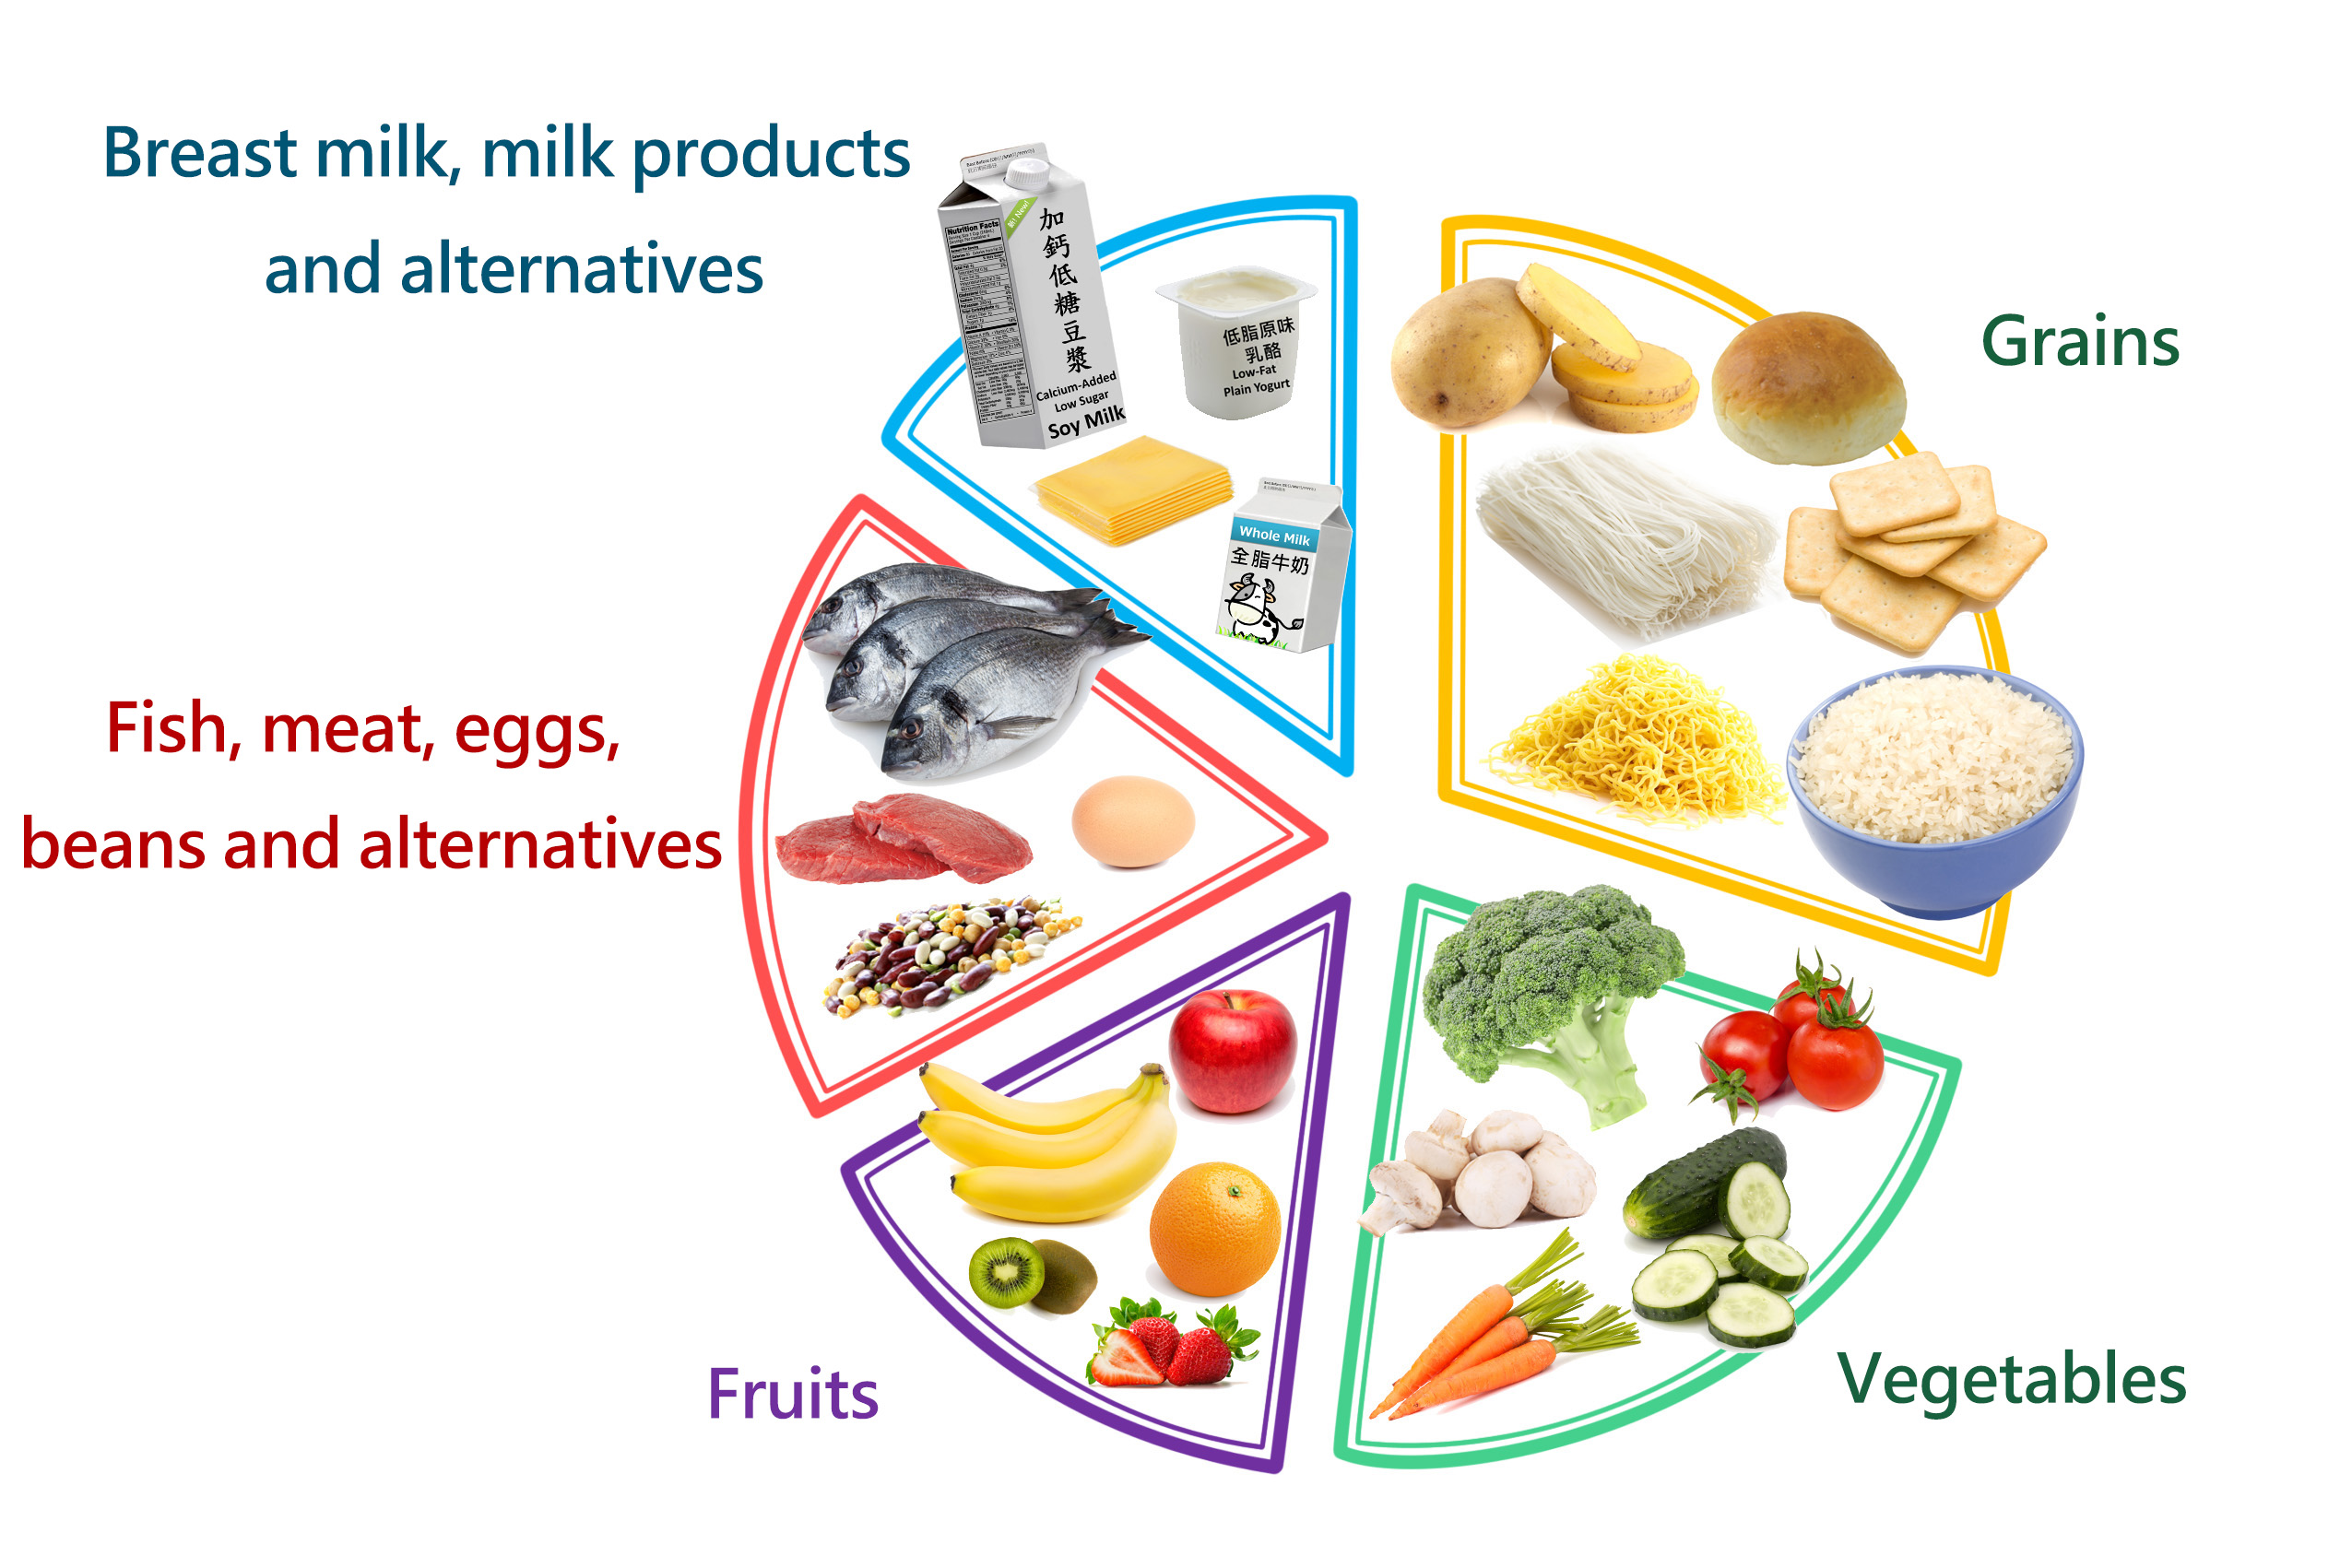 Balanced diet includes grains, vegetables, fruits, fish, meat, eggs, beans and alternatives and breast milk, milk products and alternatives